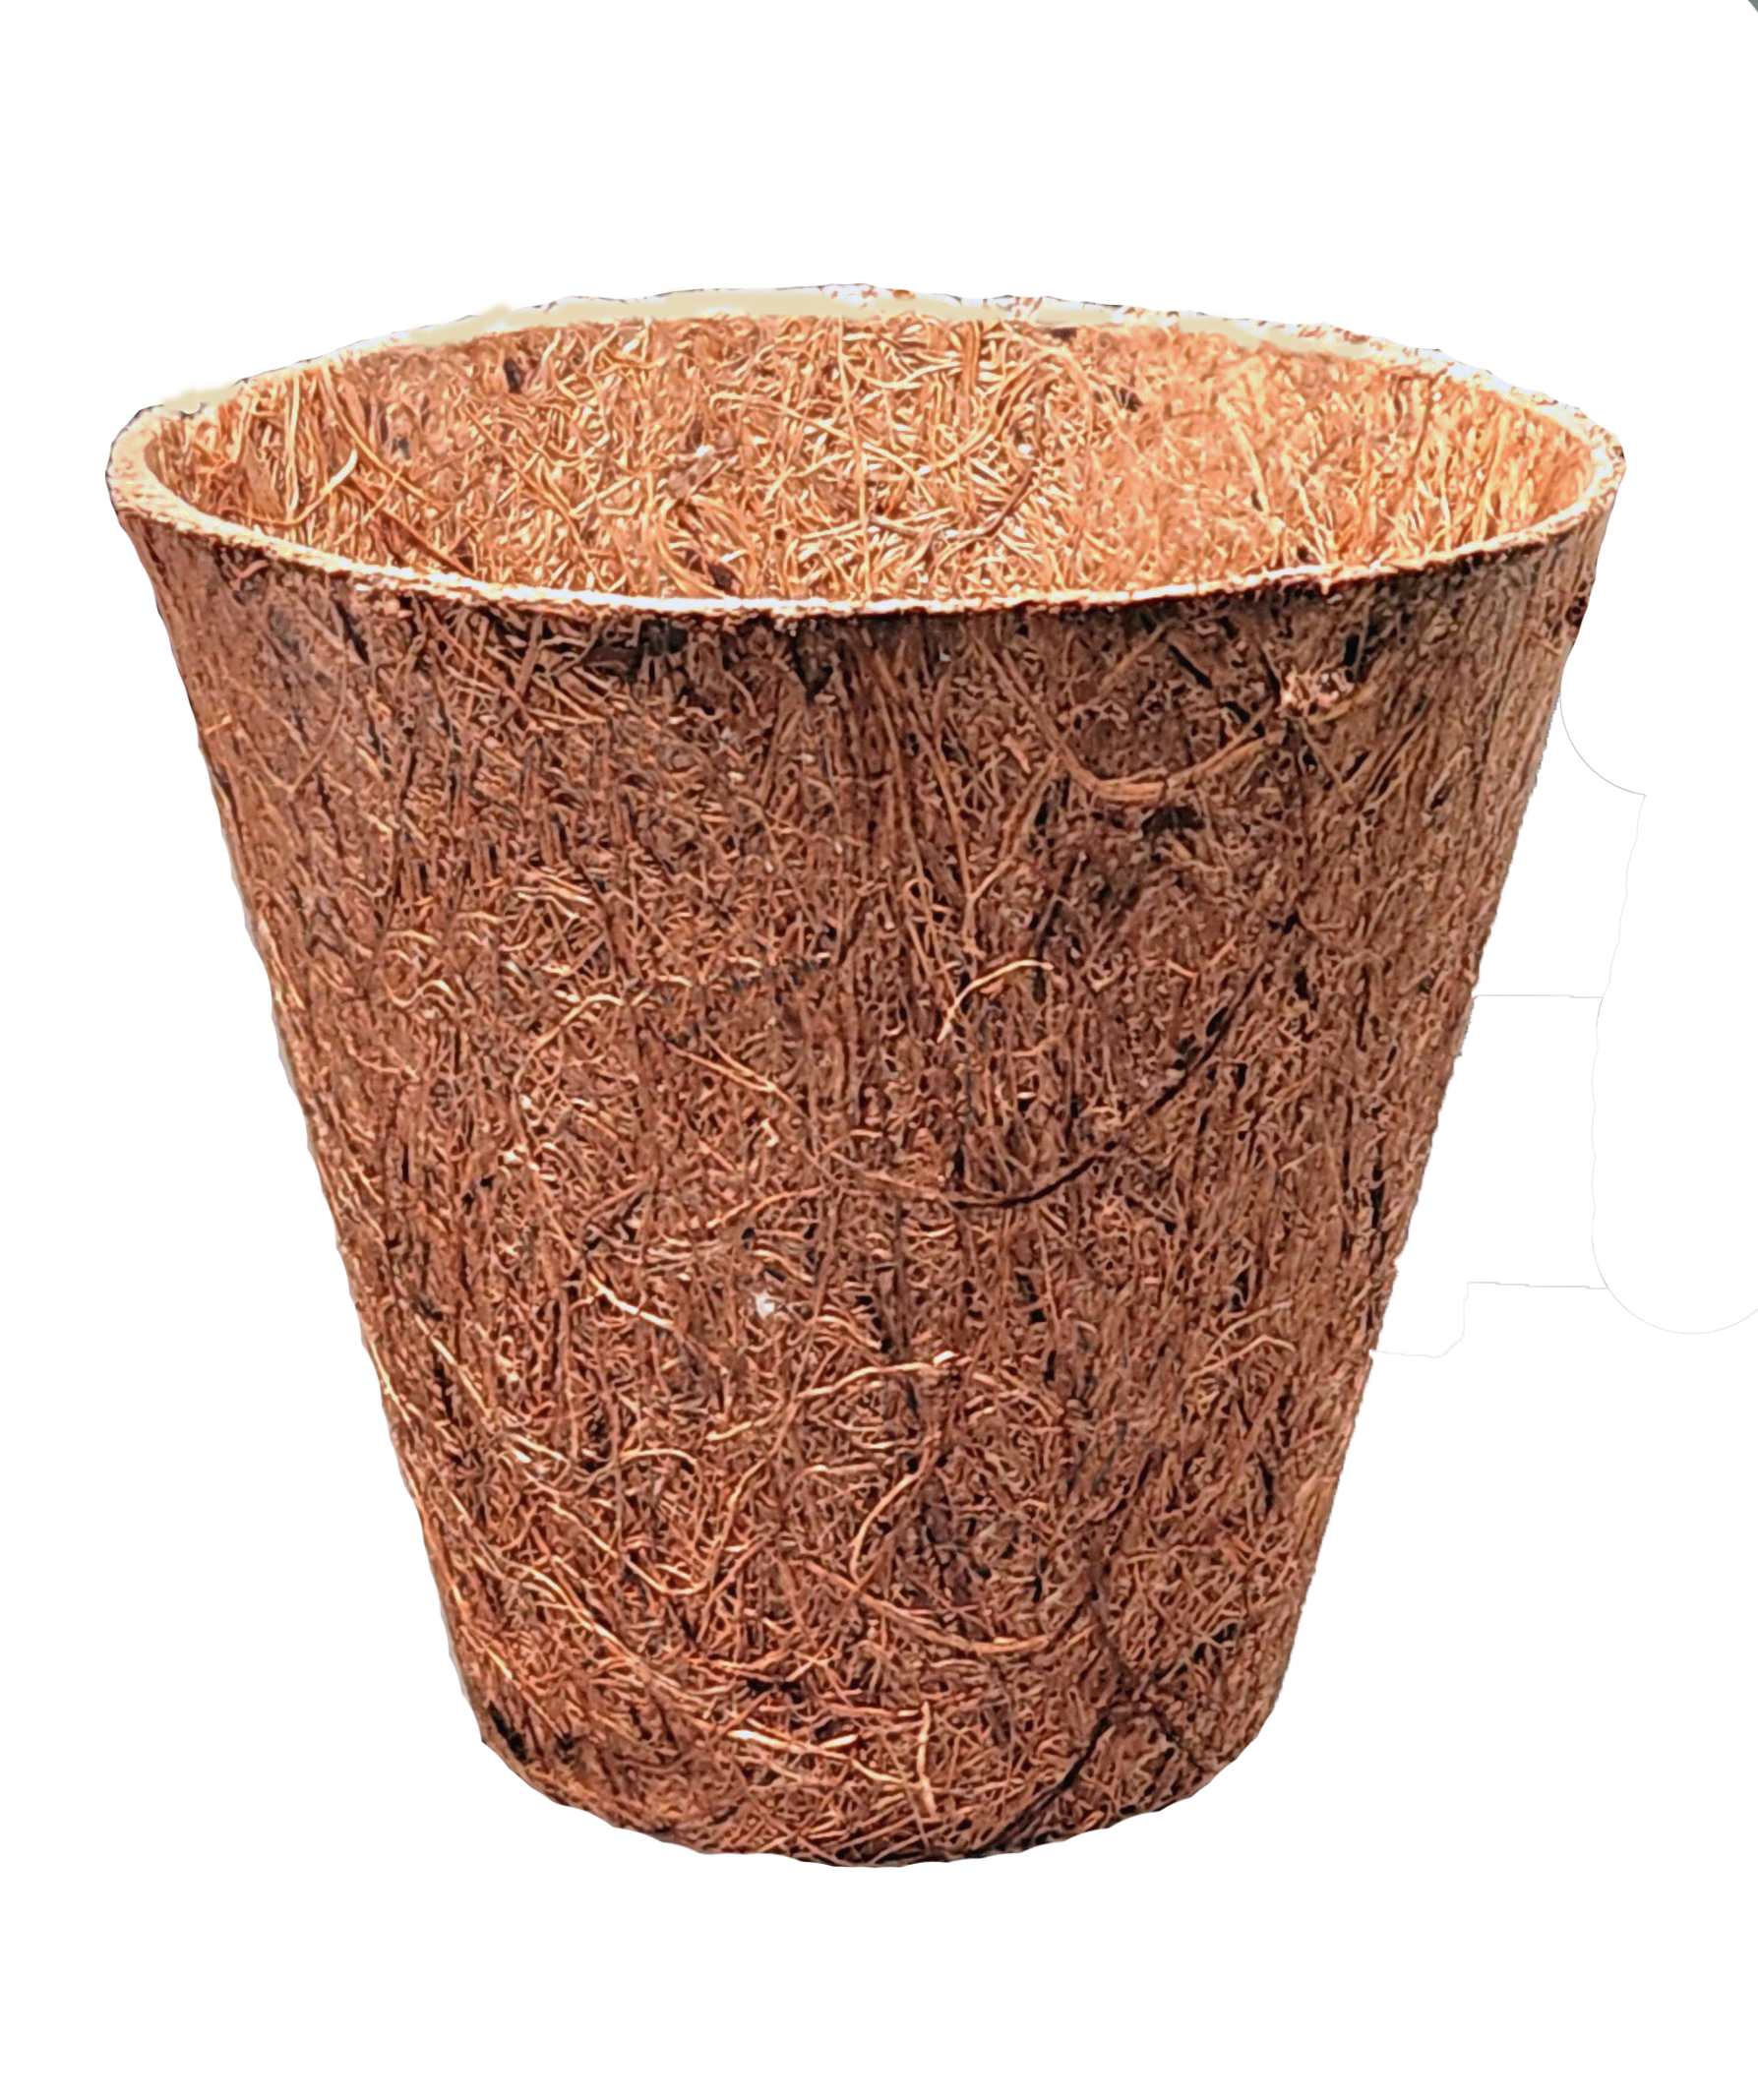 Deepthi Coco Coir Nursery Pots – Biodegradable Peat Pots for Seed Starter and Seedling - Mini Planter Cups for Indoor, Outdoor